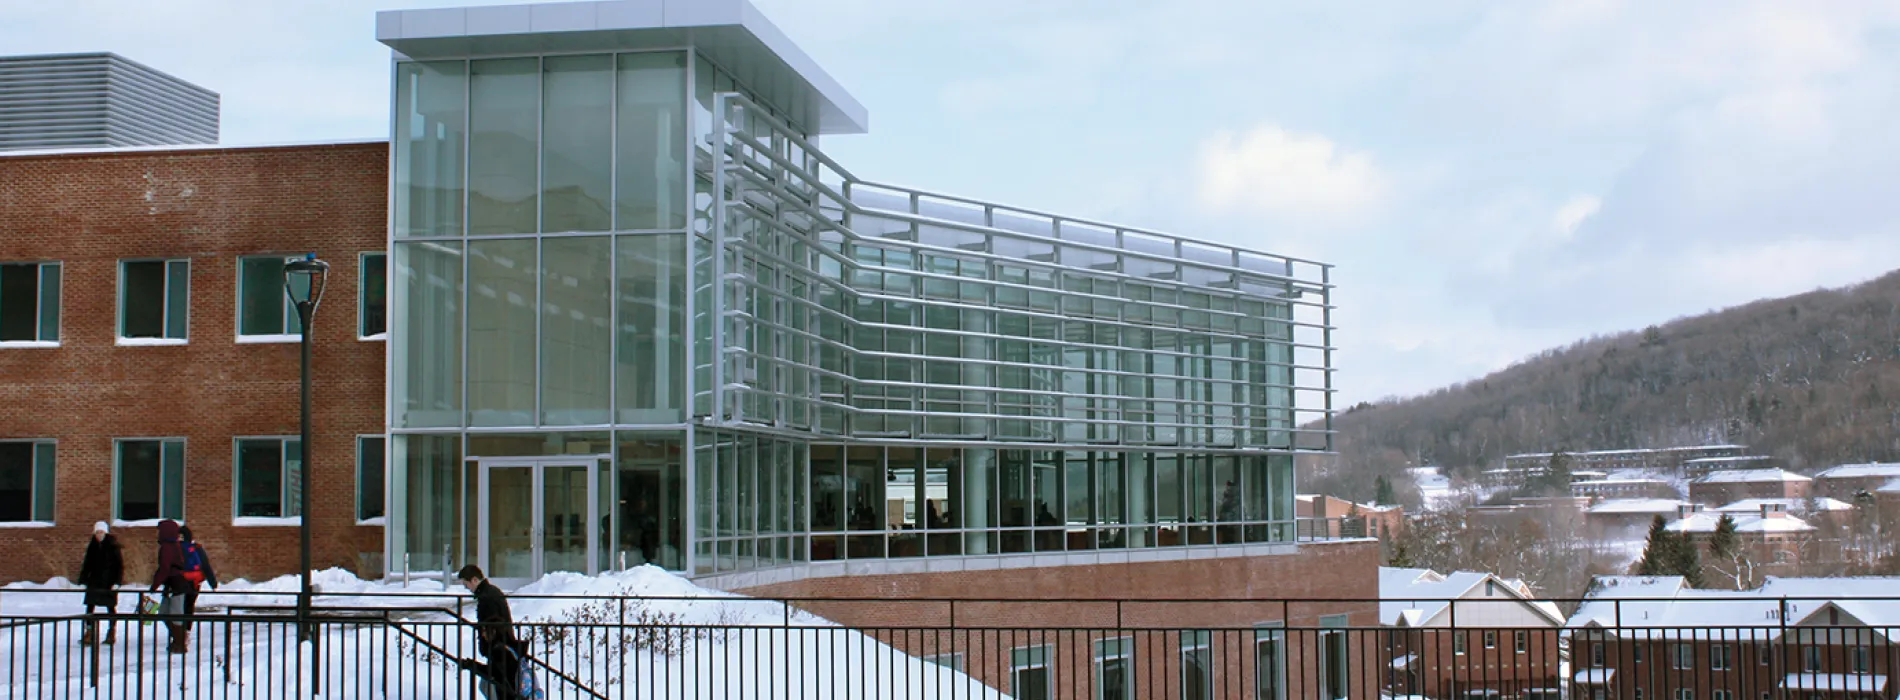 winter view of Student Leadership Center with snow on the ground